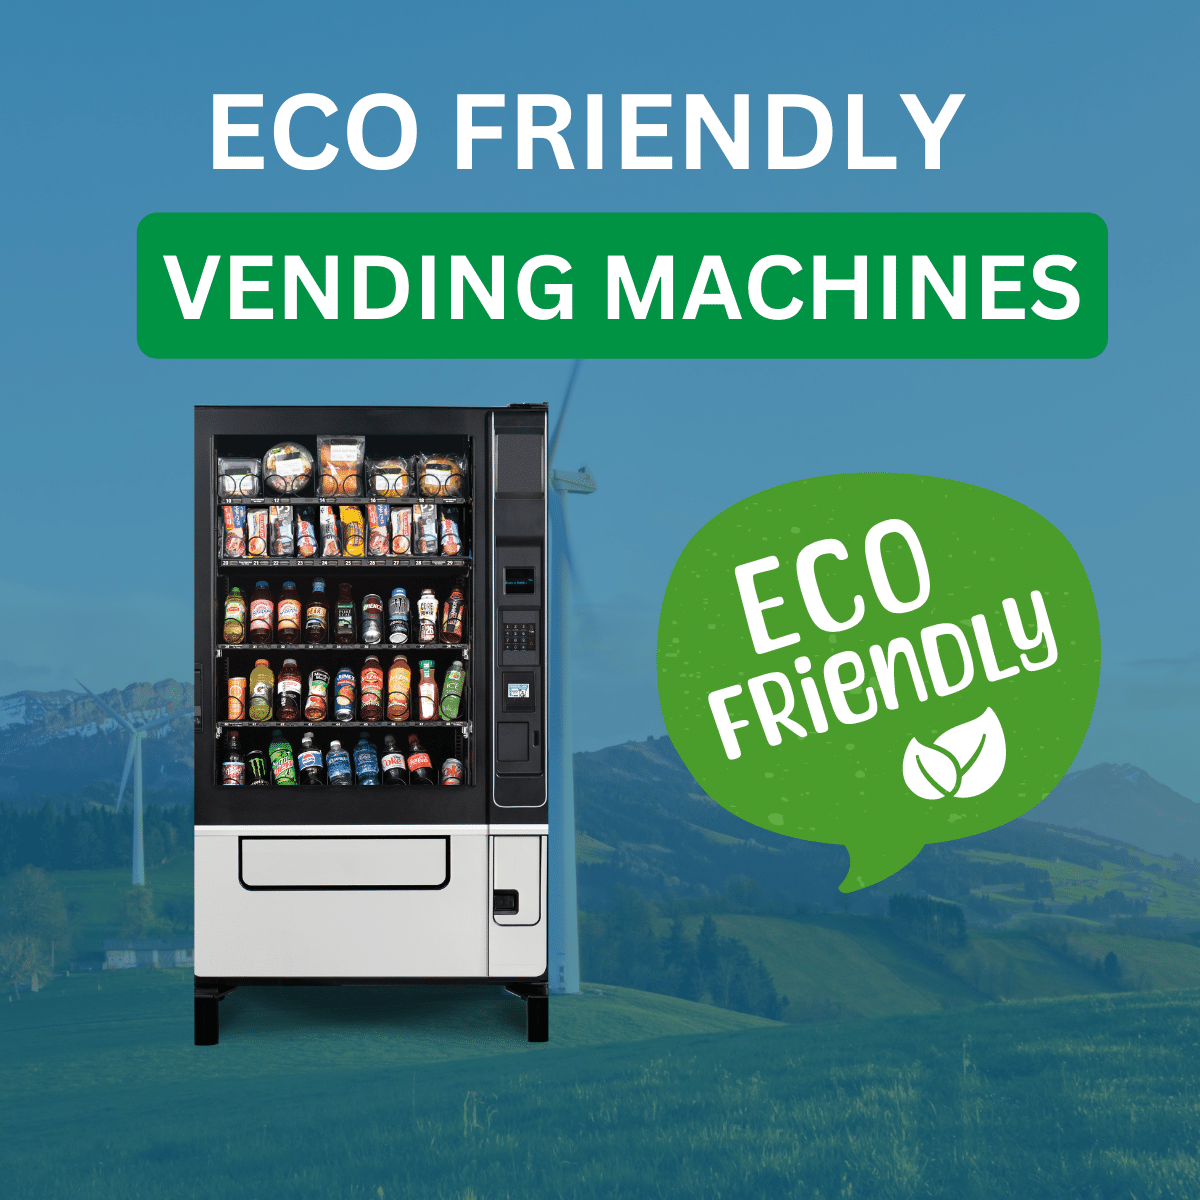 EARTH DAY- ECO-FRIENDLY VENDING MACHINES, VENDING SUSTAINABILITY